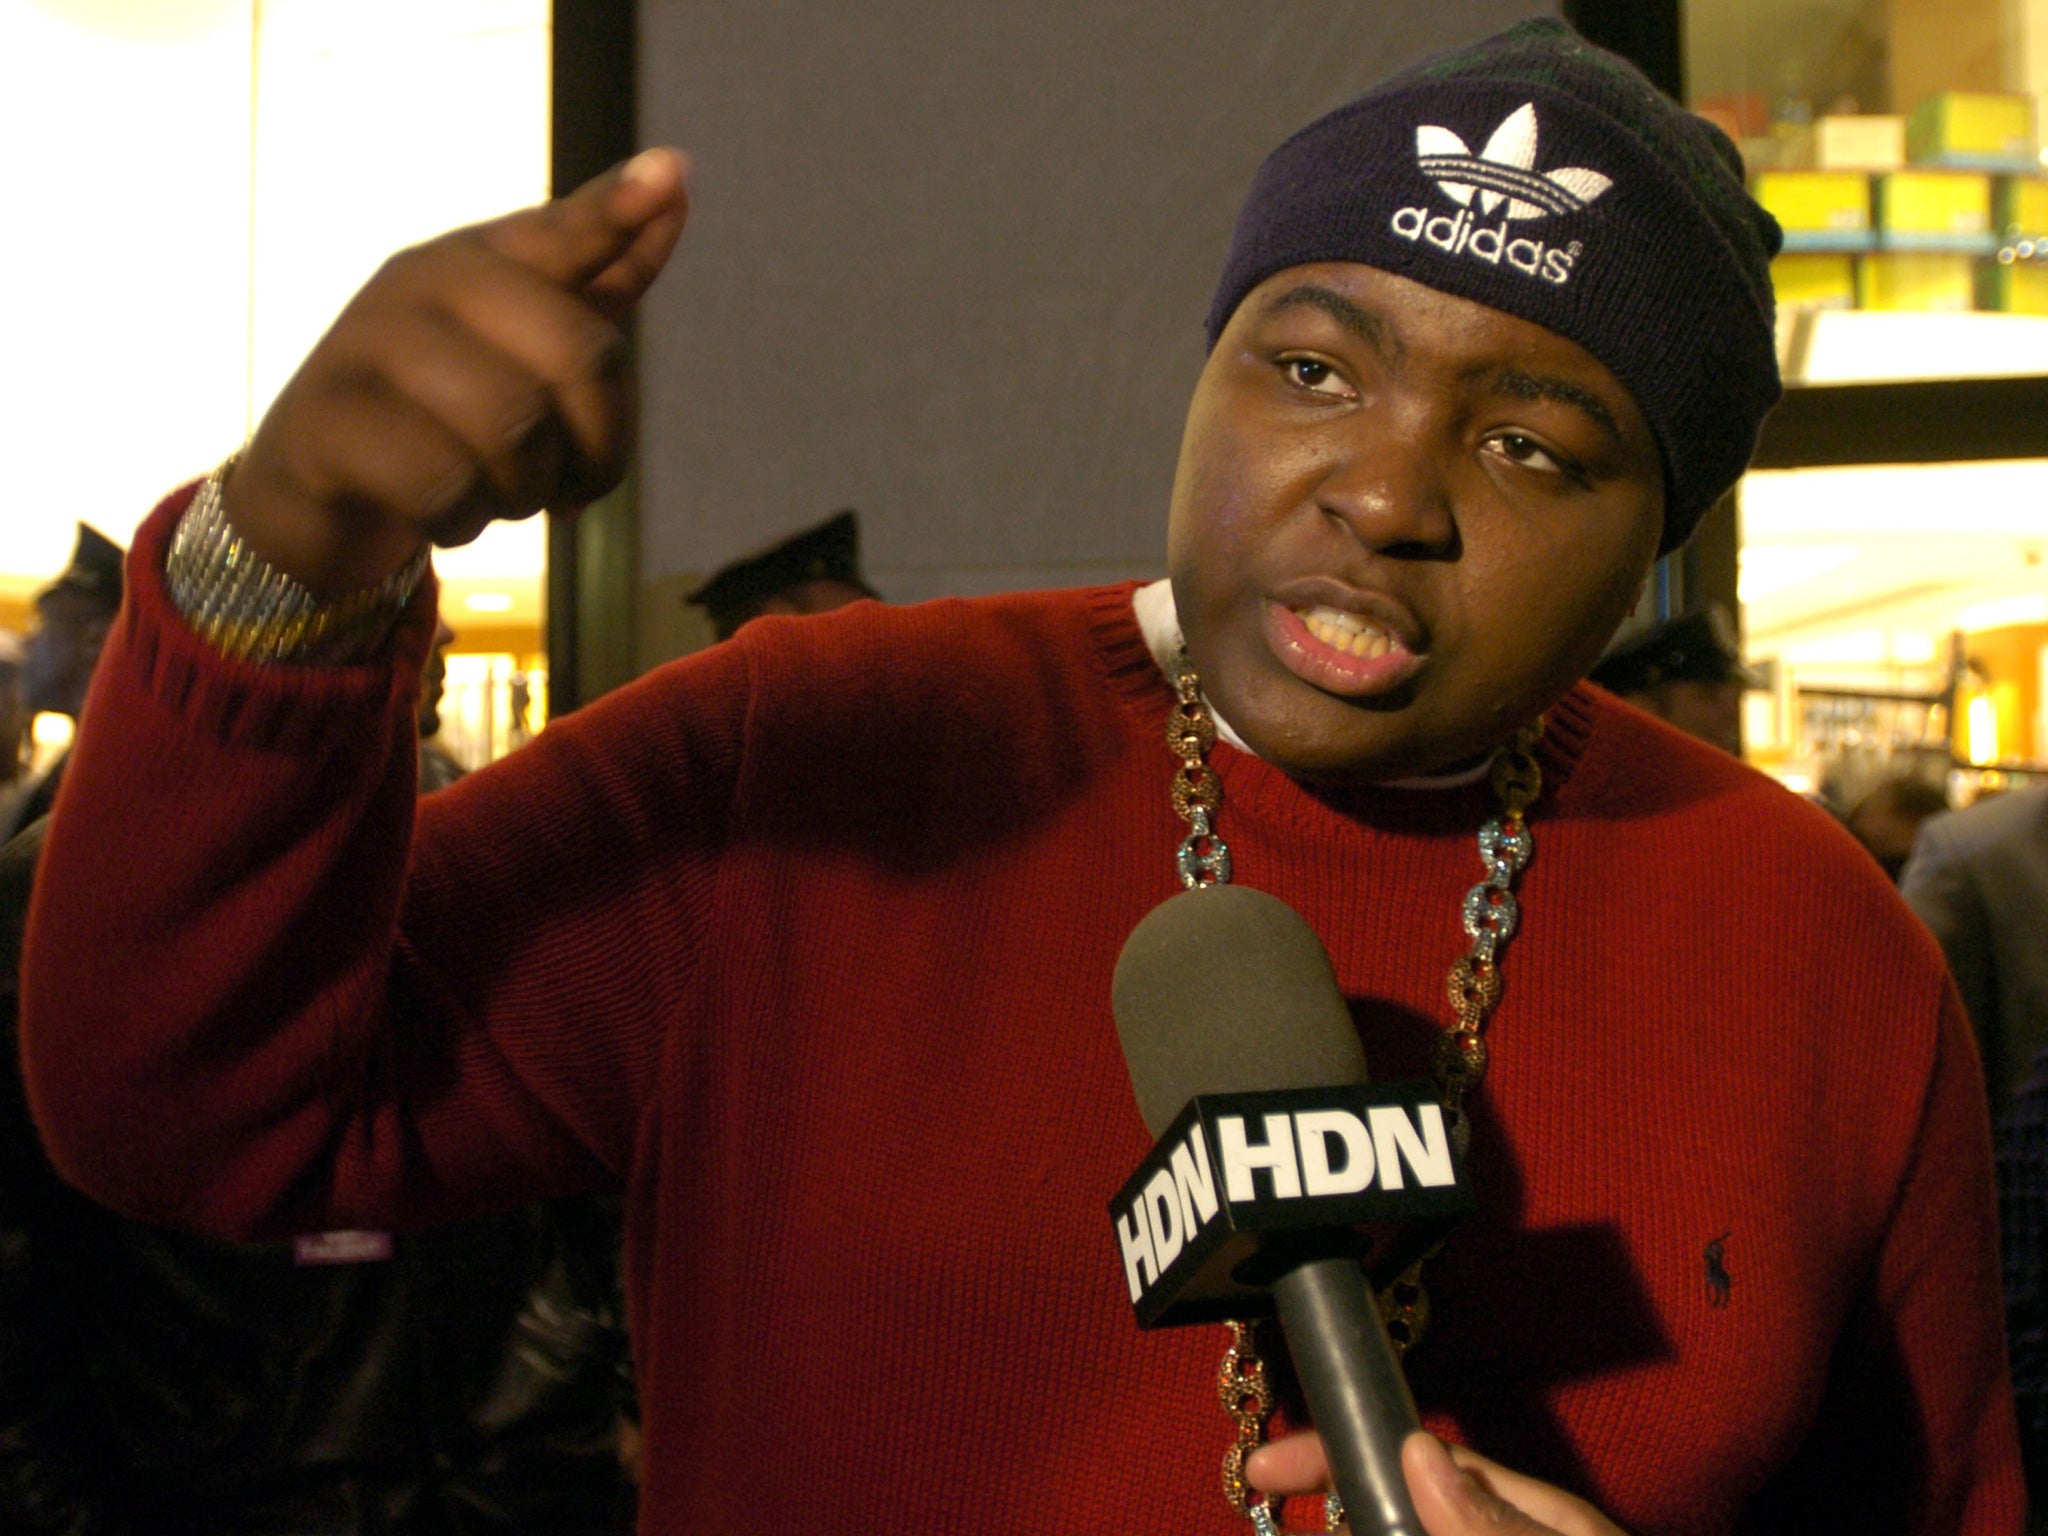 The mother of rapper Sean Kingston has been arrested during a raid at his Florida mansion